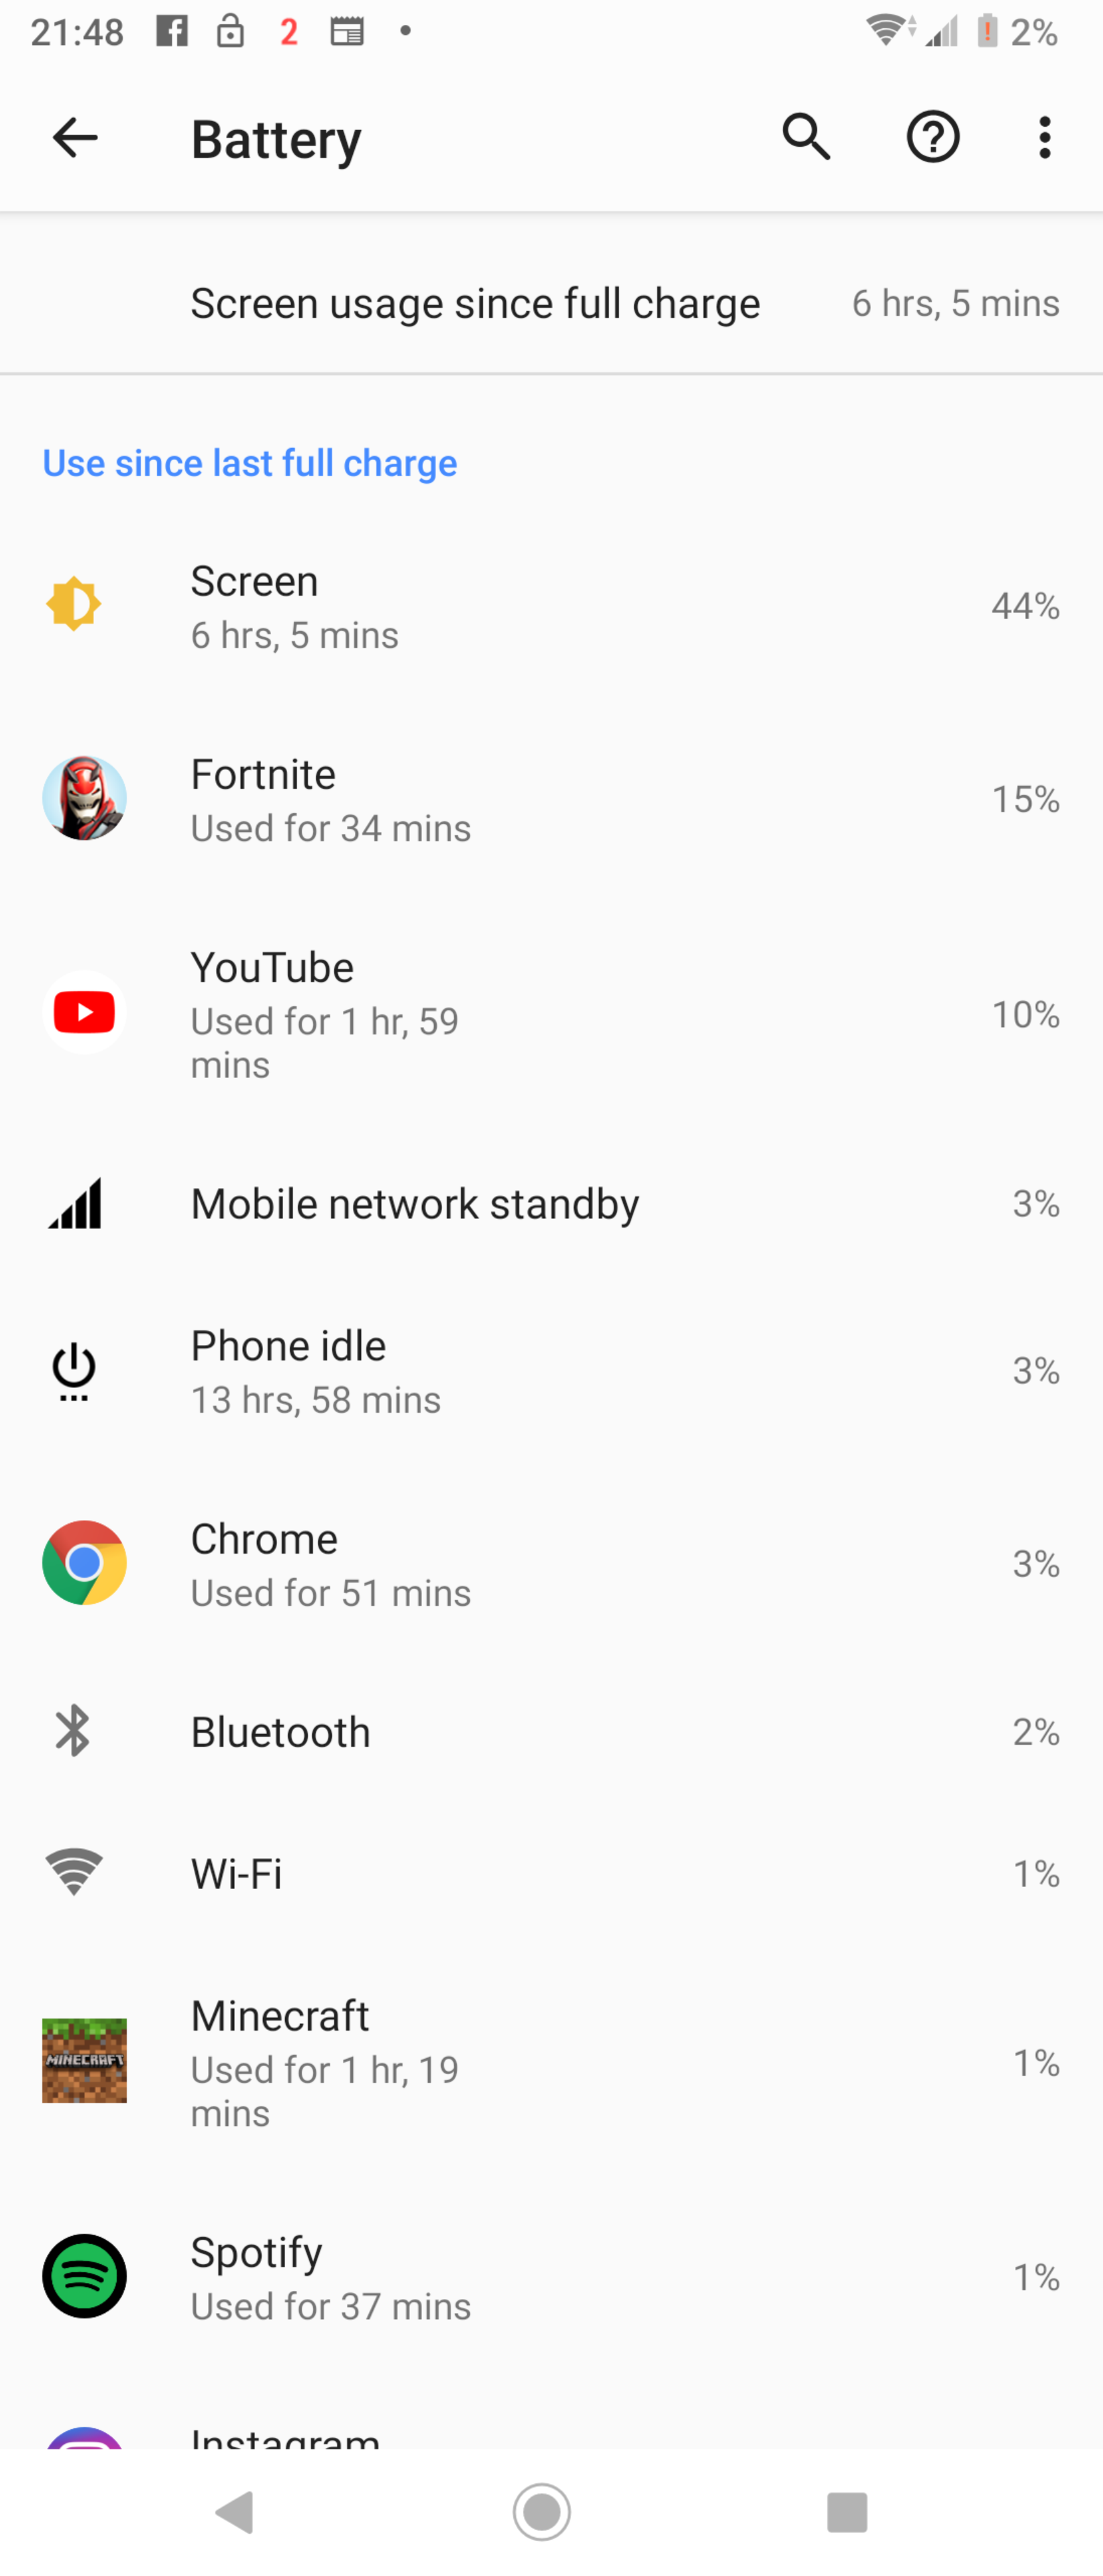 Sony Xperia 1 battery life: real-life impressions and test results are out!